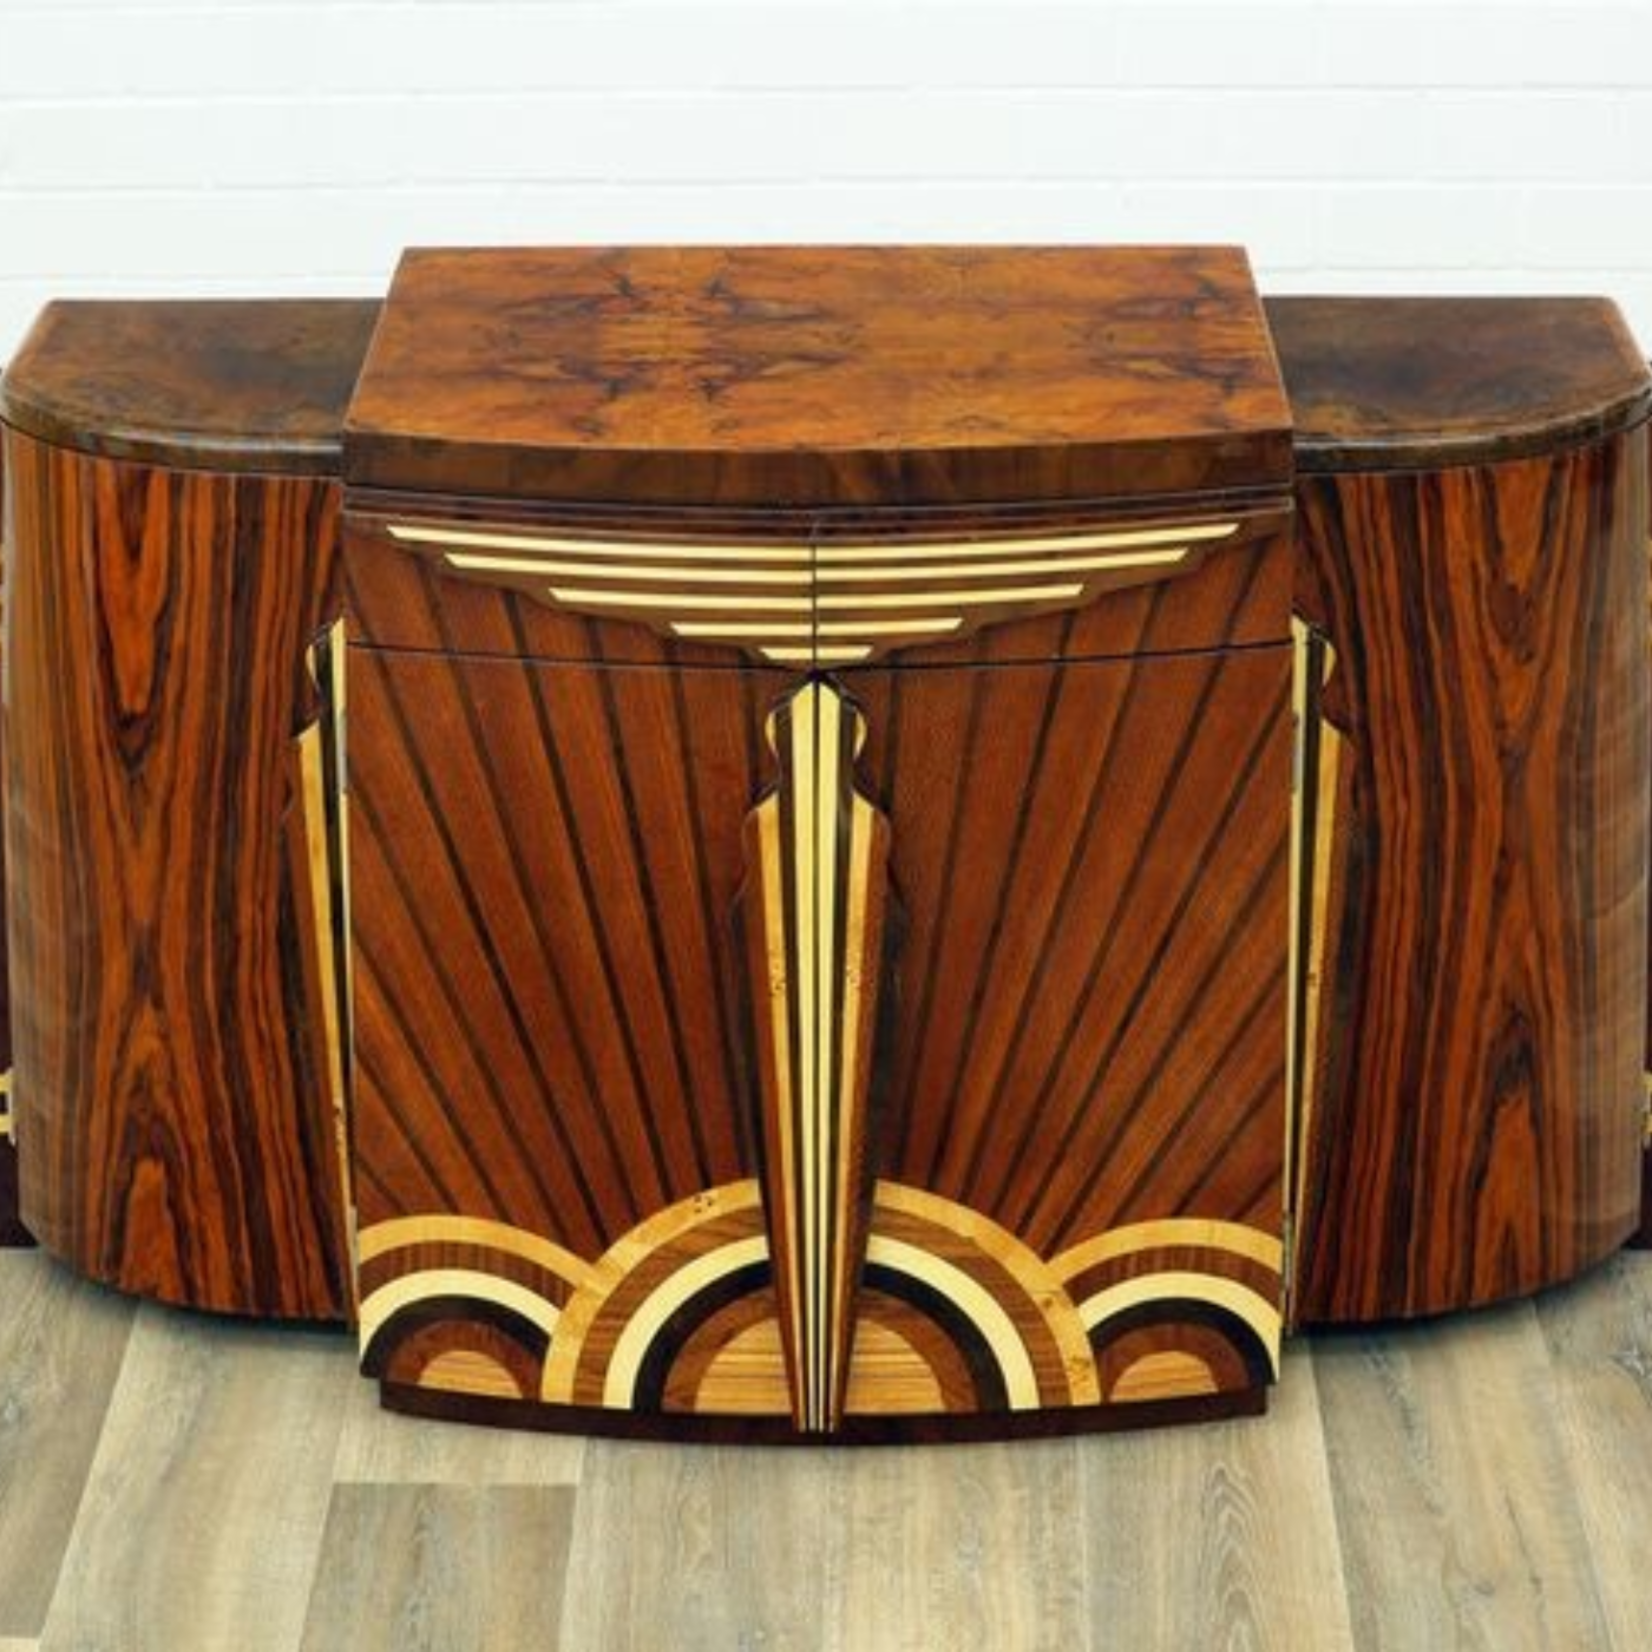 LC art deco buffet from the 1920s - Copy